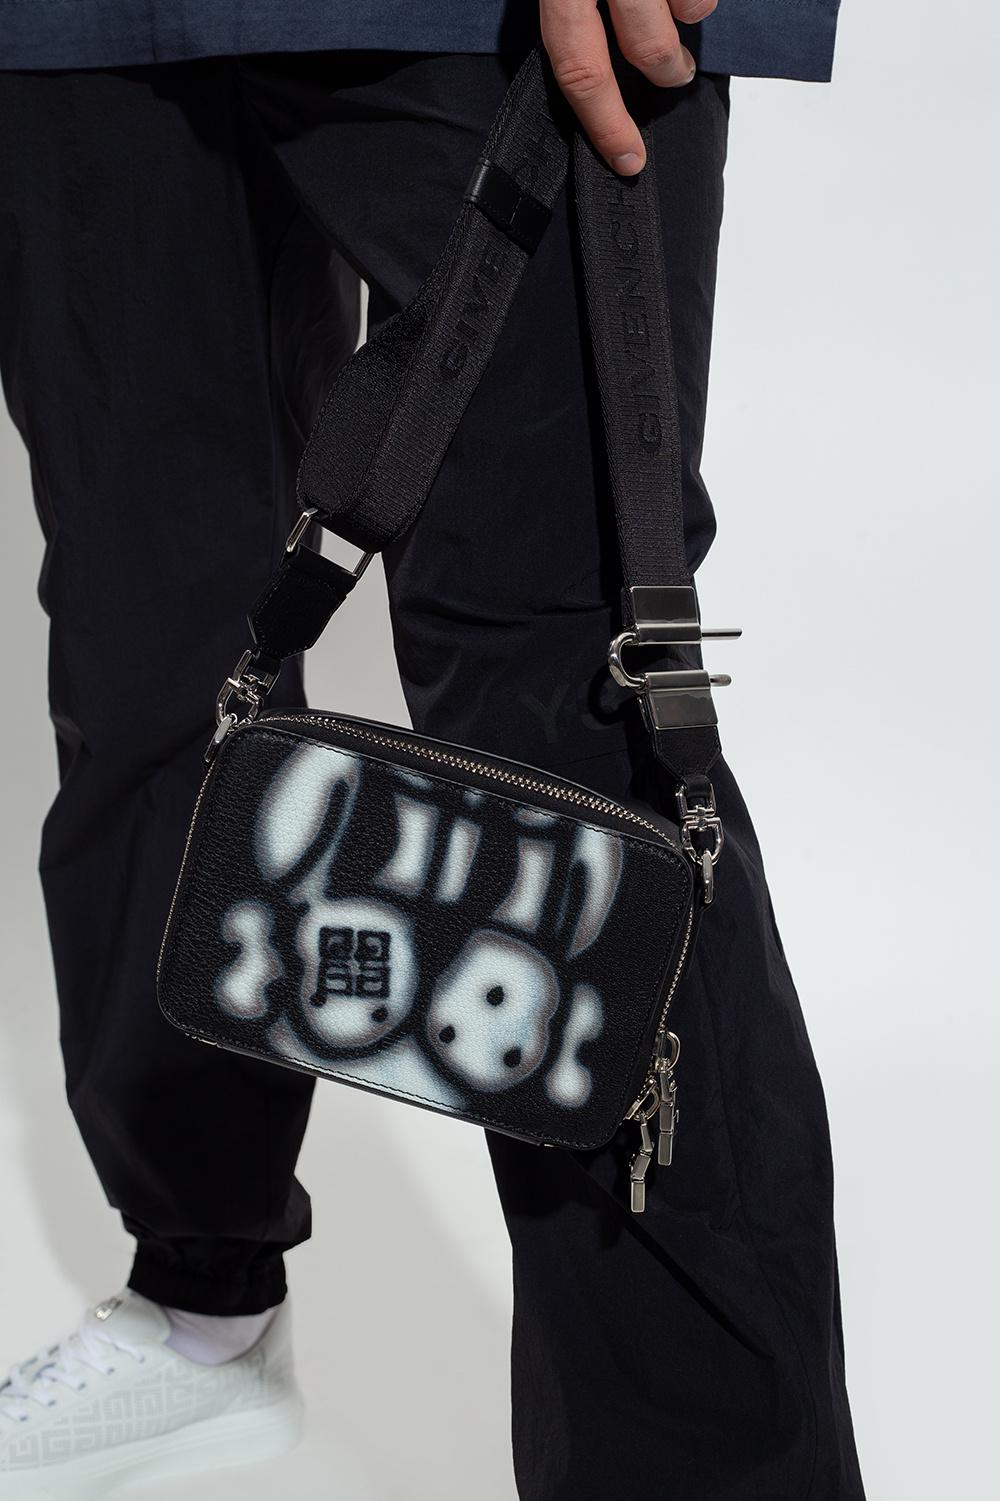 Men's Bags | Givenchy Givenchy x Chito | IetpShops | Парфюмированая вода  givenchy hot couture